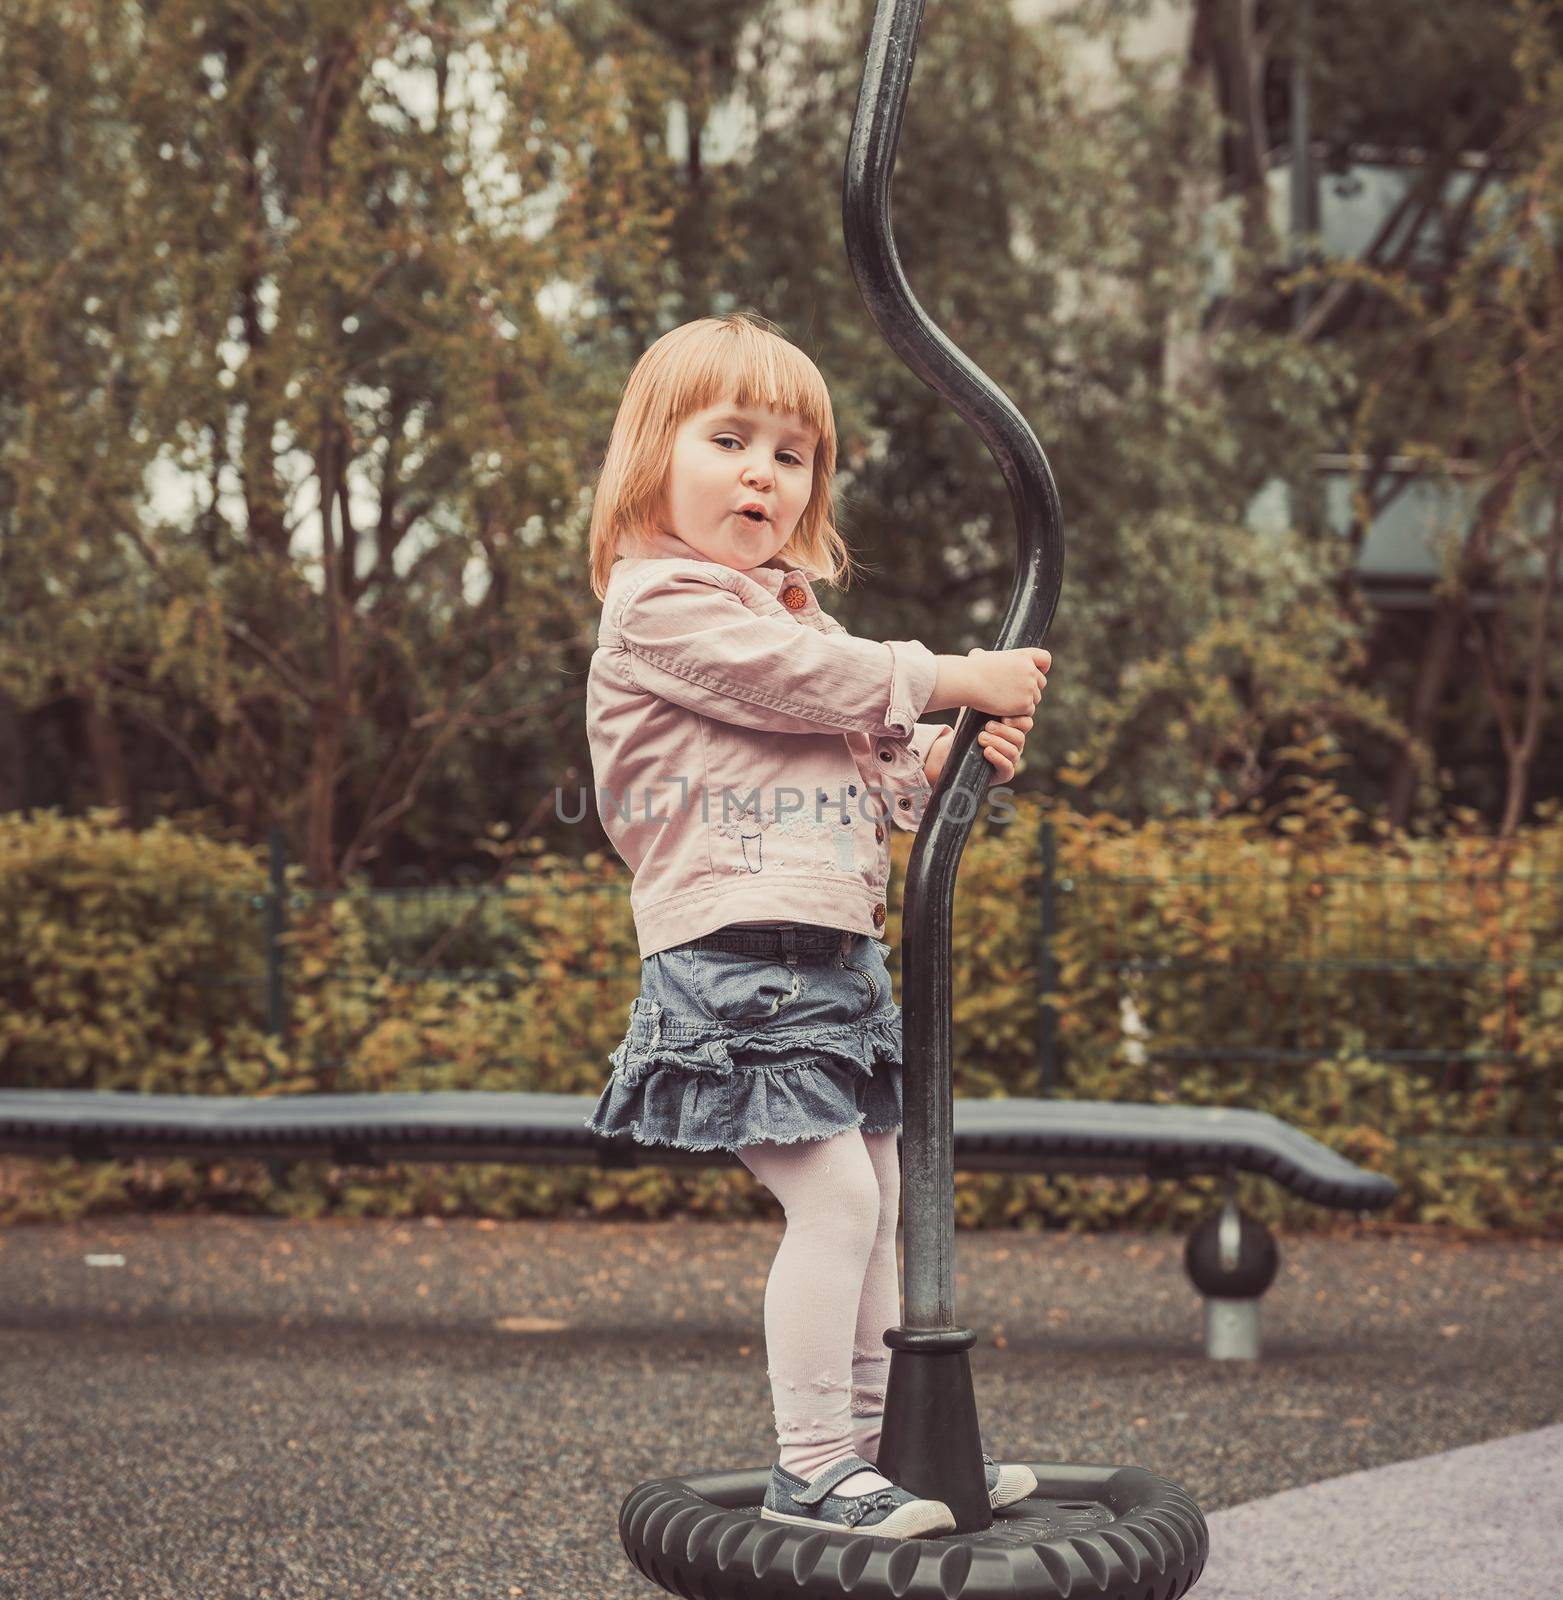 playing little girl on a playground